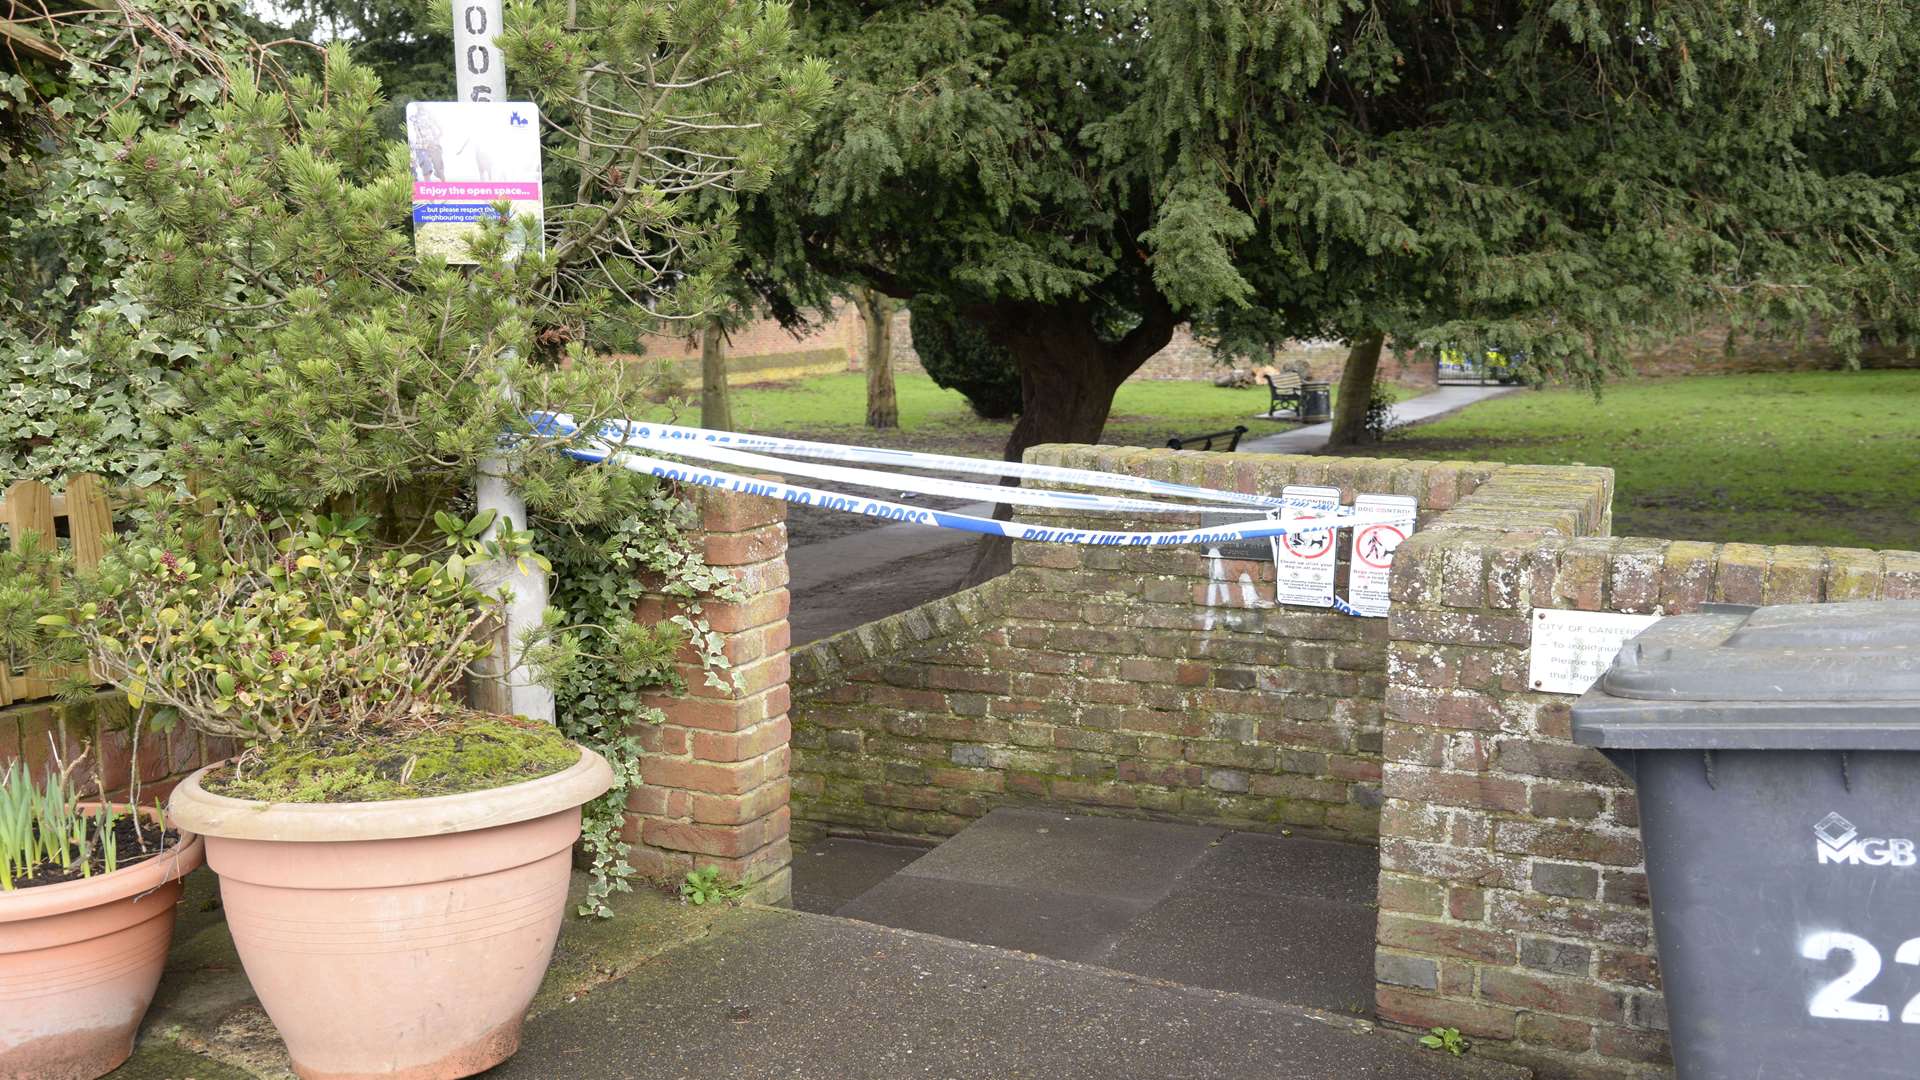 Both entrances to the former St Paul’s churchyard was taped off